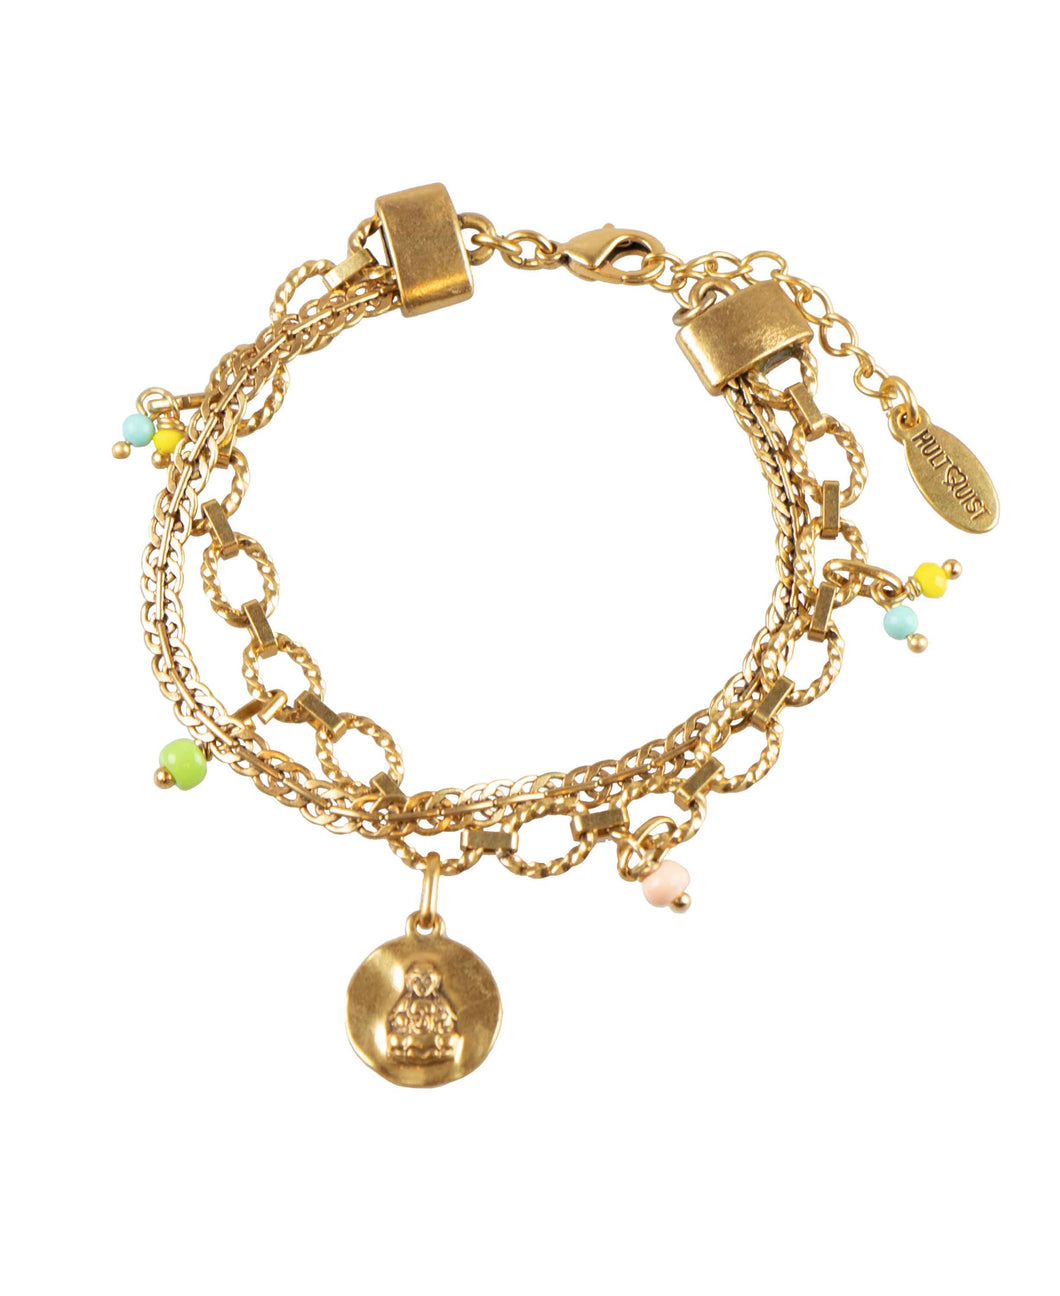 Gold Charm And Bead Bracelet